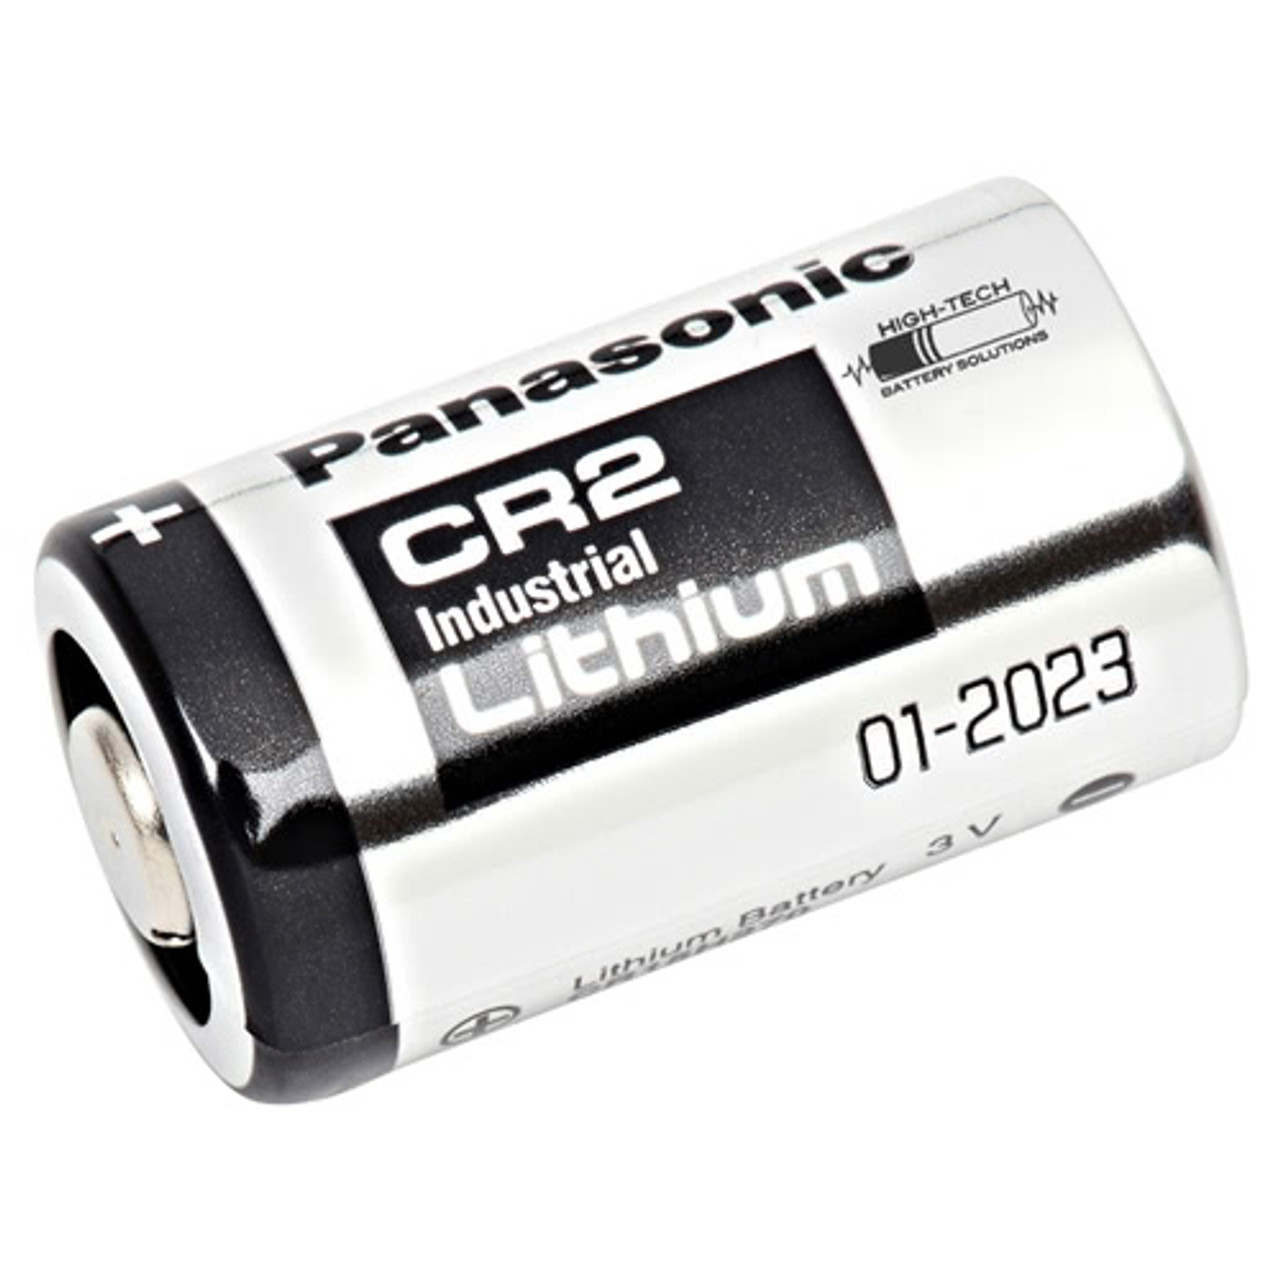 Lithium battery CR2 3V - Batteries - Electric-Collars.com